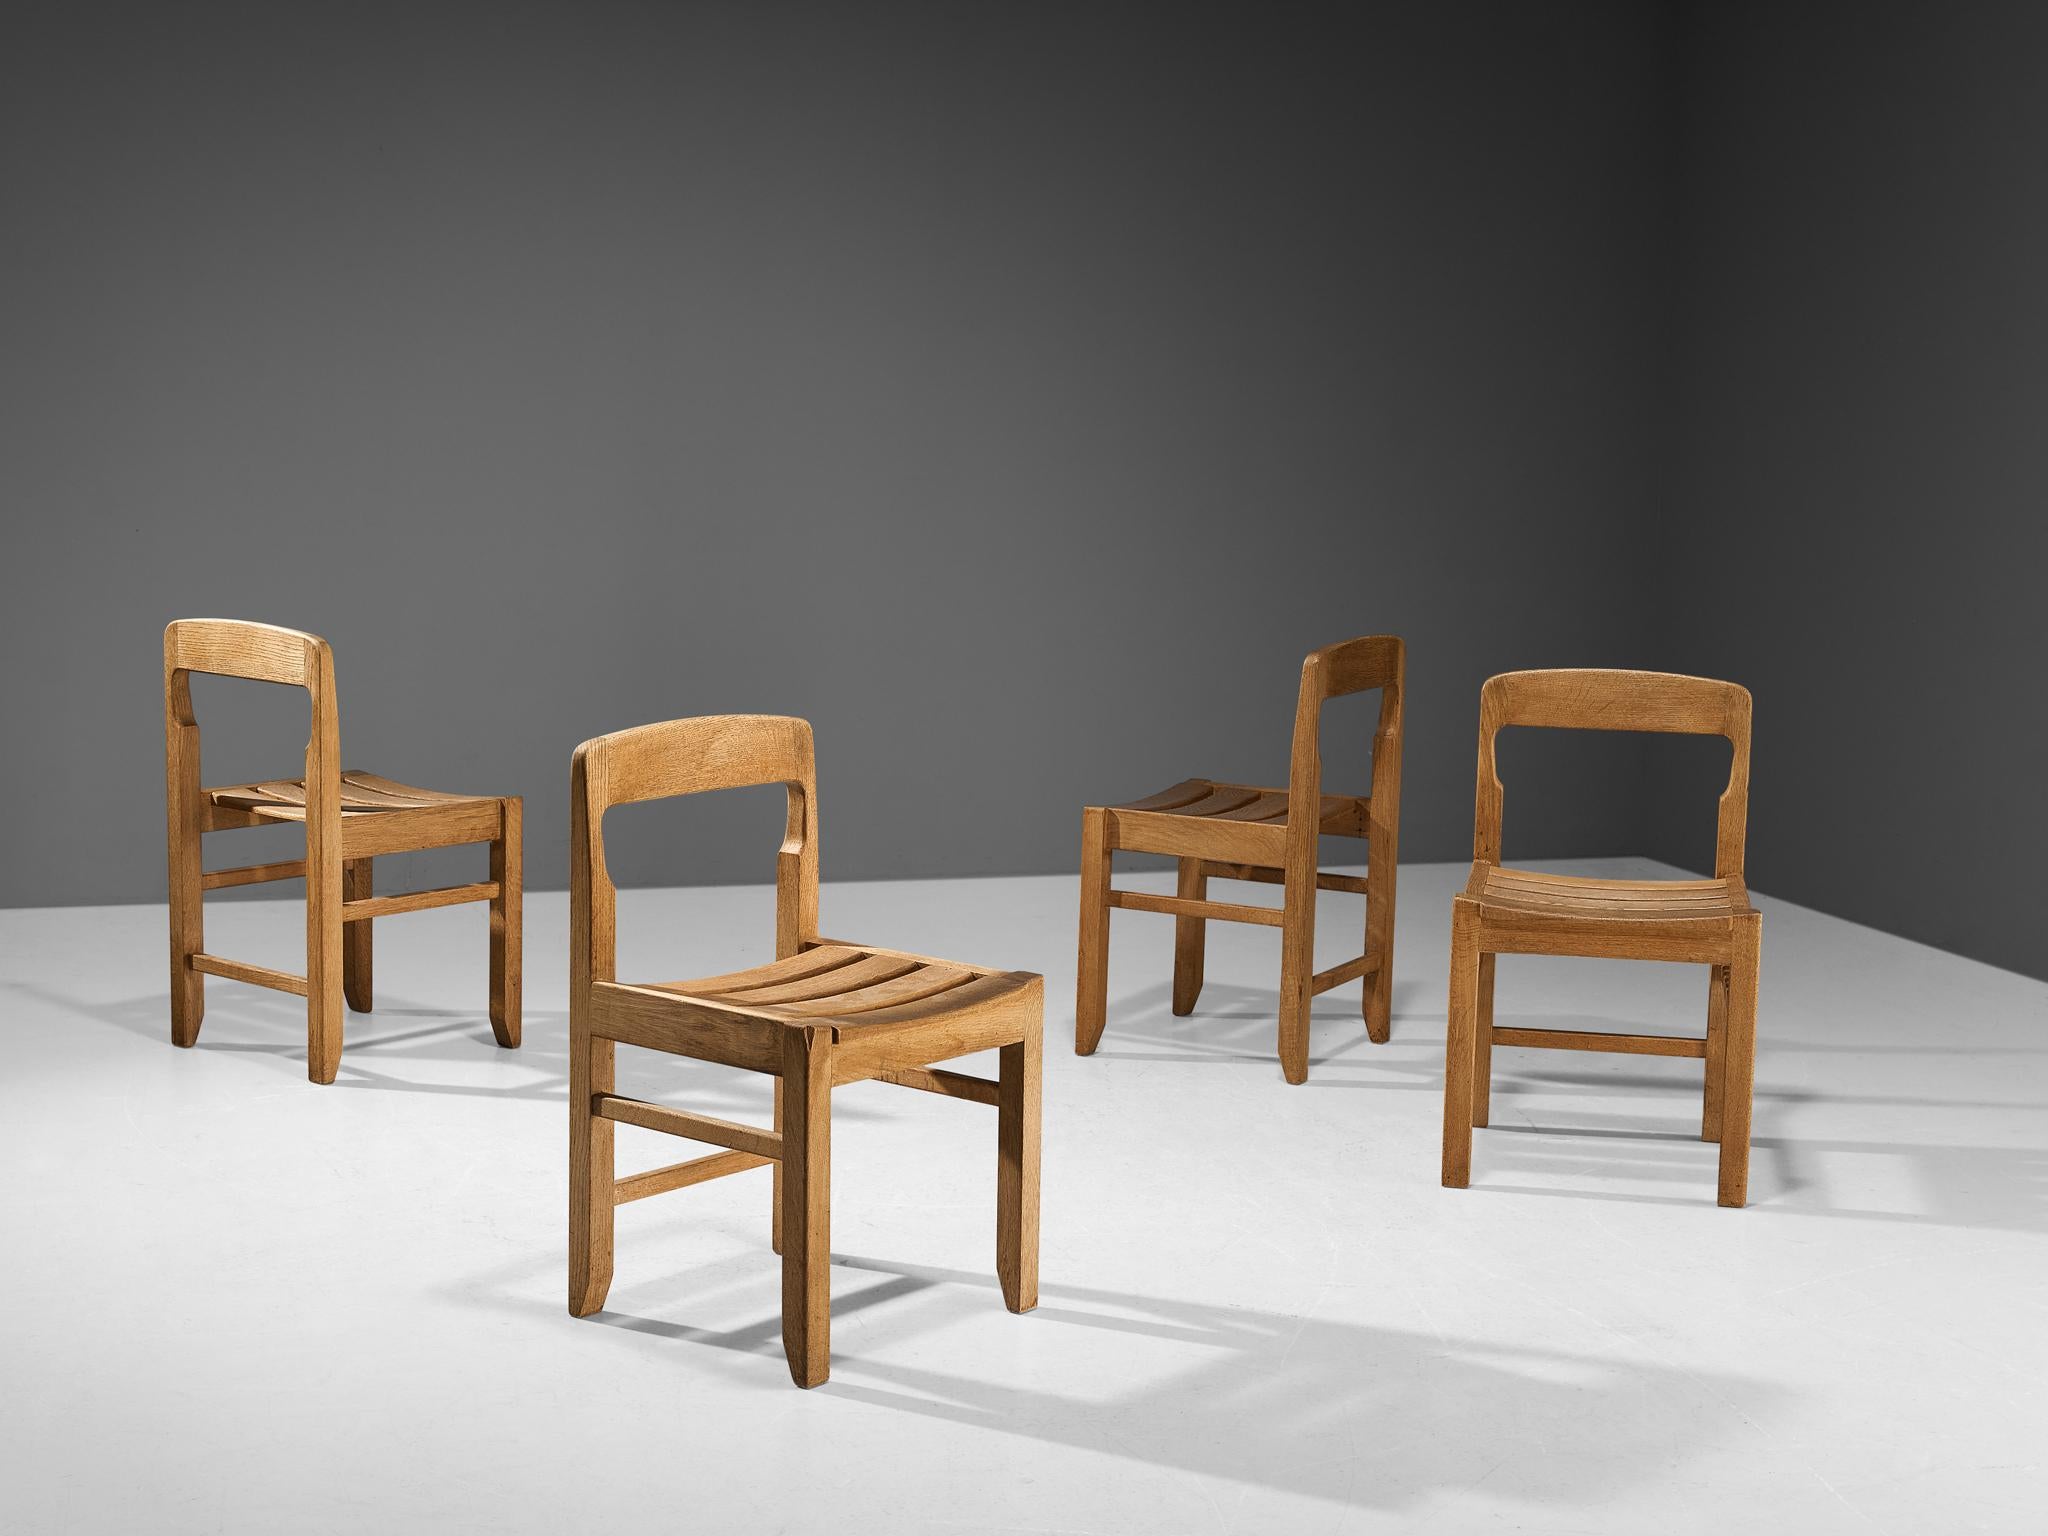 Guillerme et Chambron for Votre Maison, set of four dining chairs, solid oak, France, 1960s.

These chairs show the characteristic frame of the French designer duo, well-crafted, solid and sculptural.  The chairs feature geometrically tapered legs